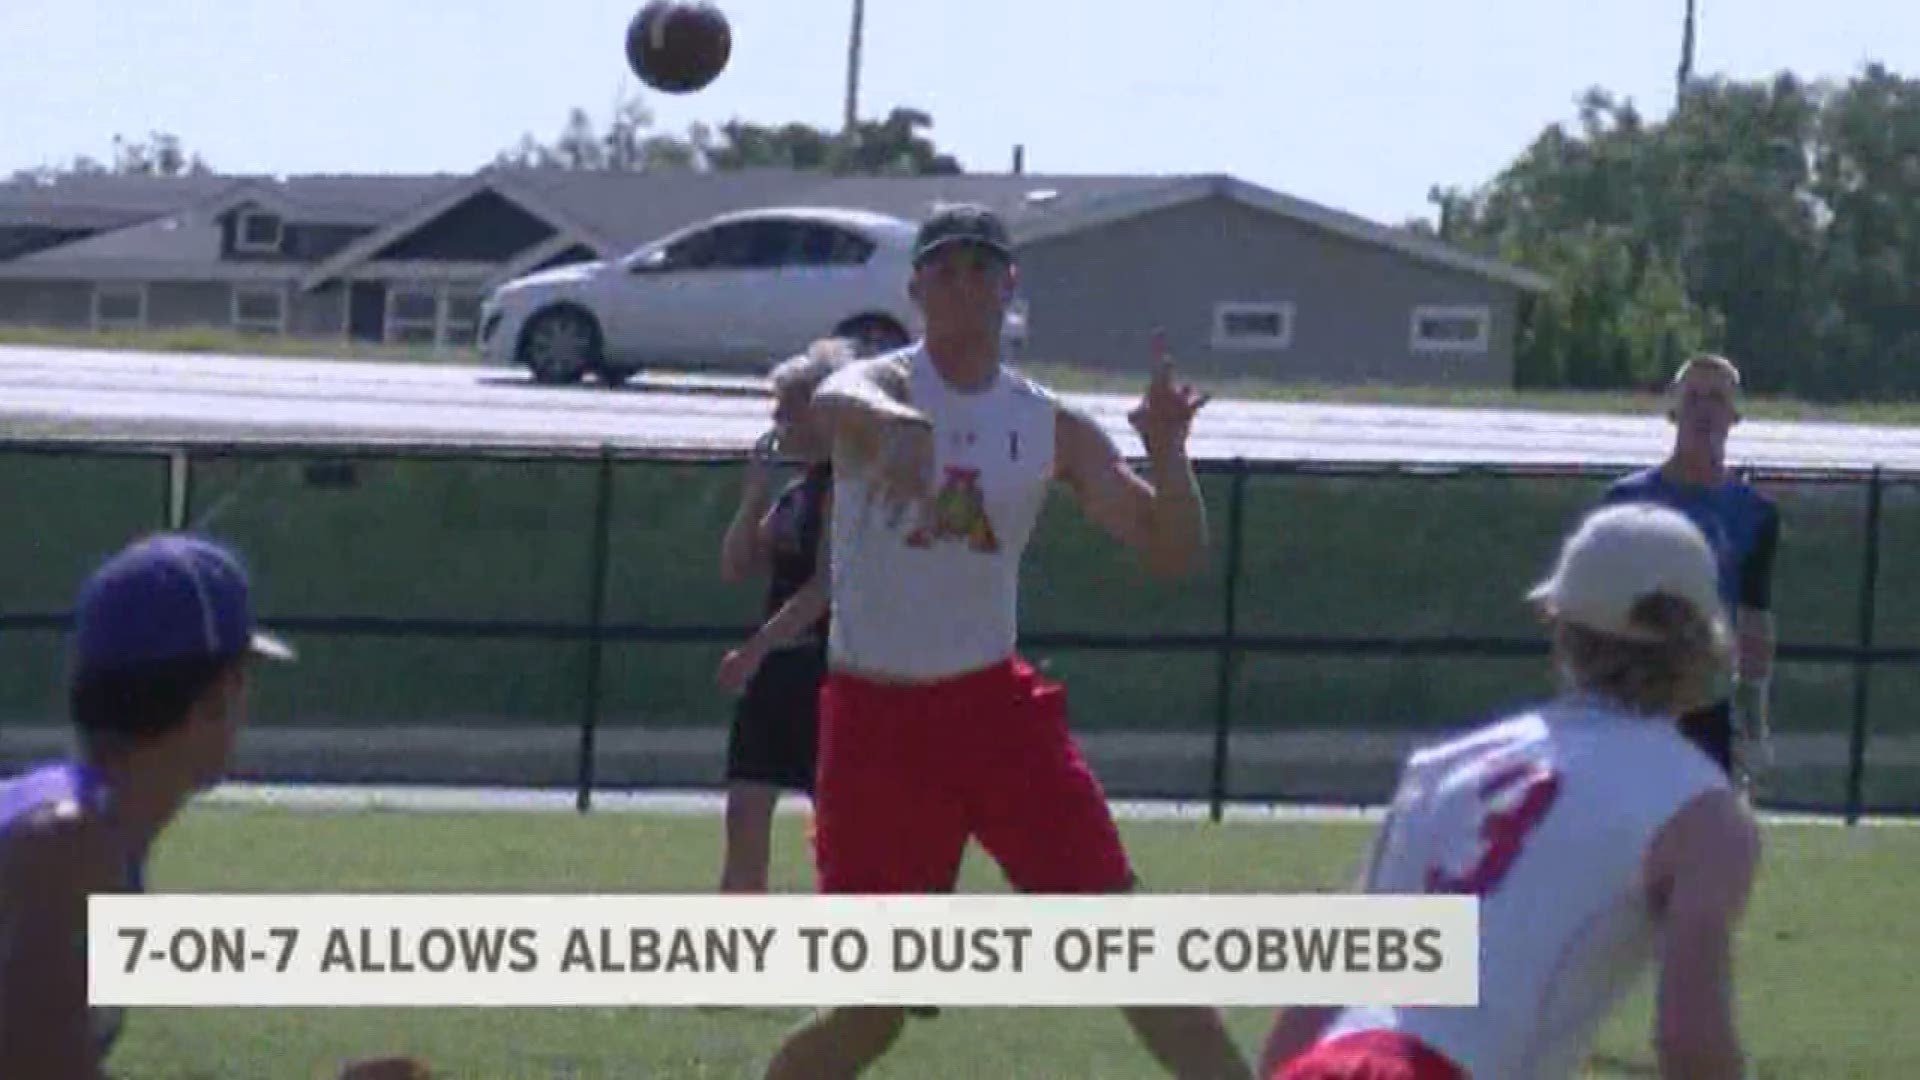 It's been quite some time since the football season ended for the Lions and several sports have come in between. The time spent competing in 7-on-7 ball is helping prepare Albany for when the season kicks off.